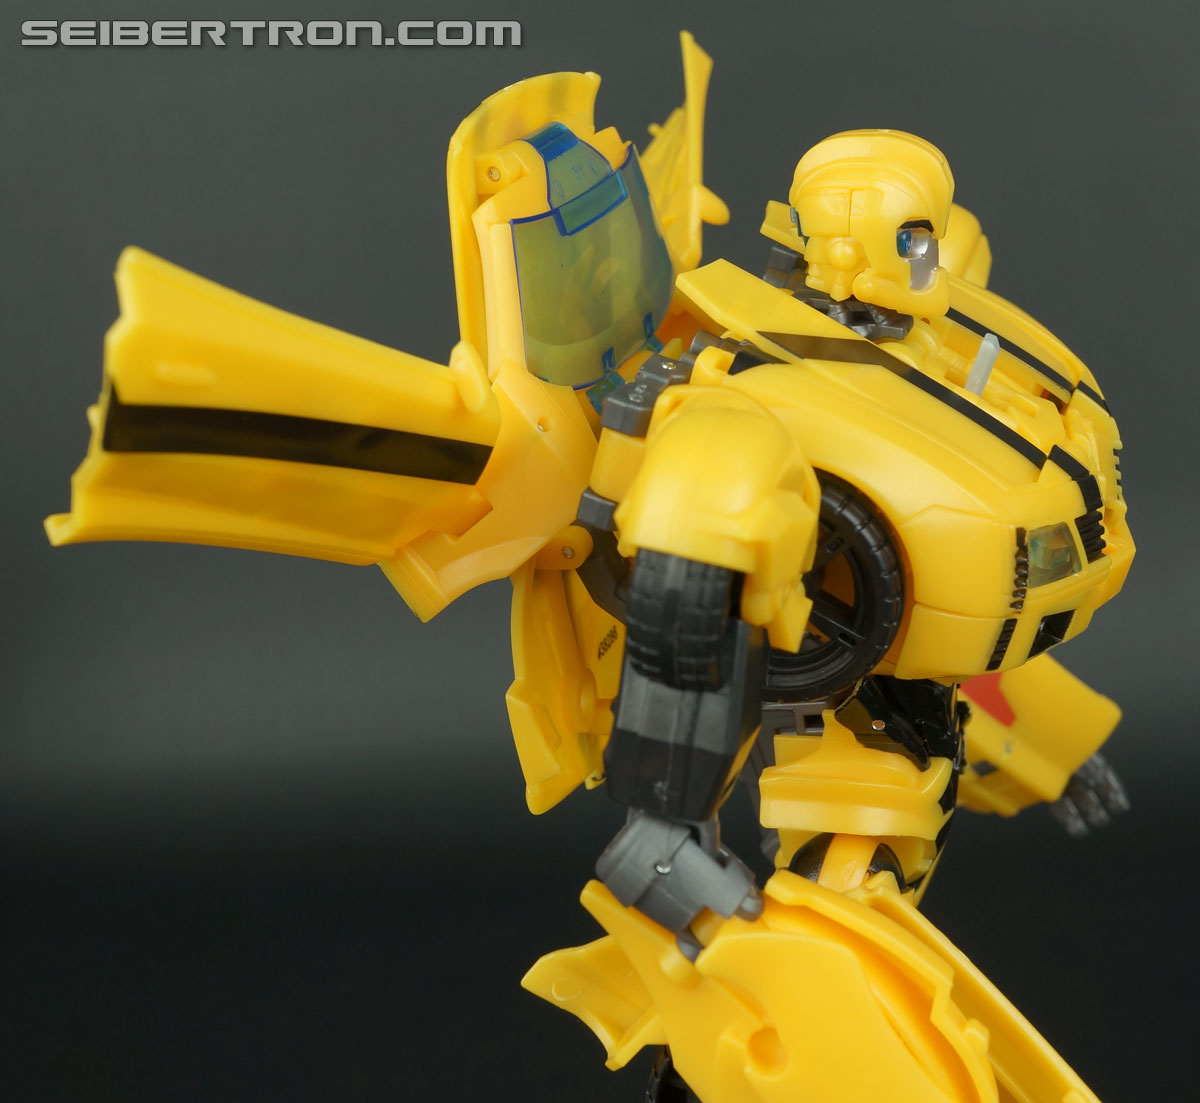 Transformers Prime: Robots In Disguise Bumblebee (Image #65 of 114)